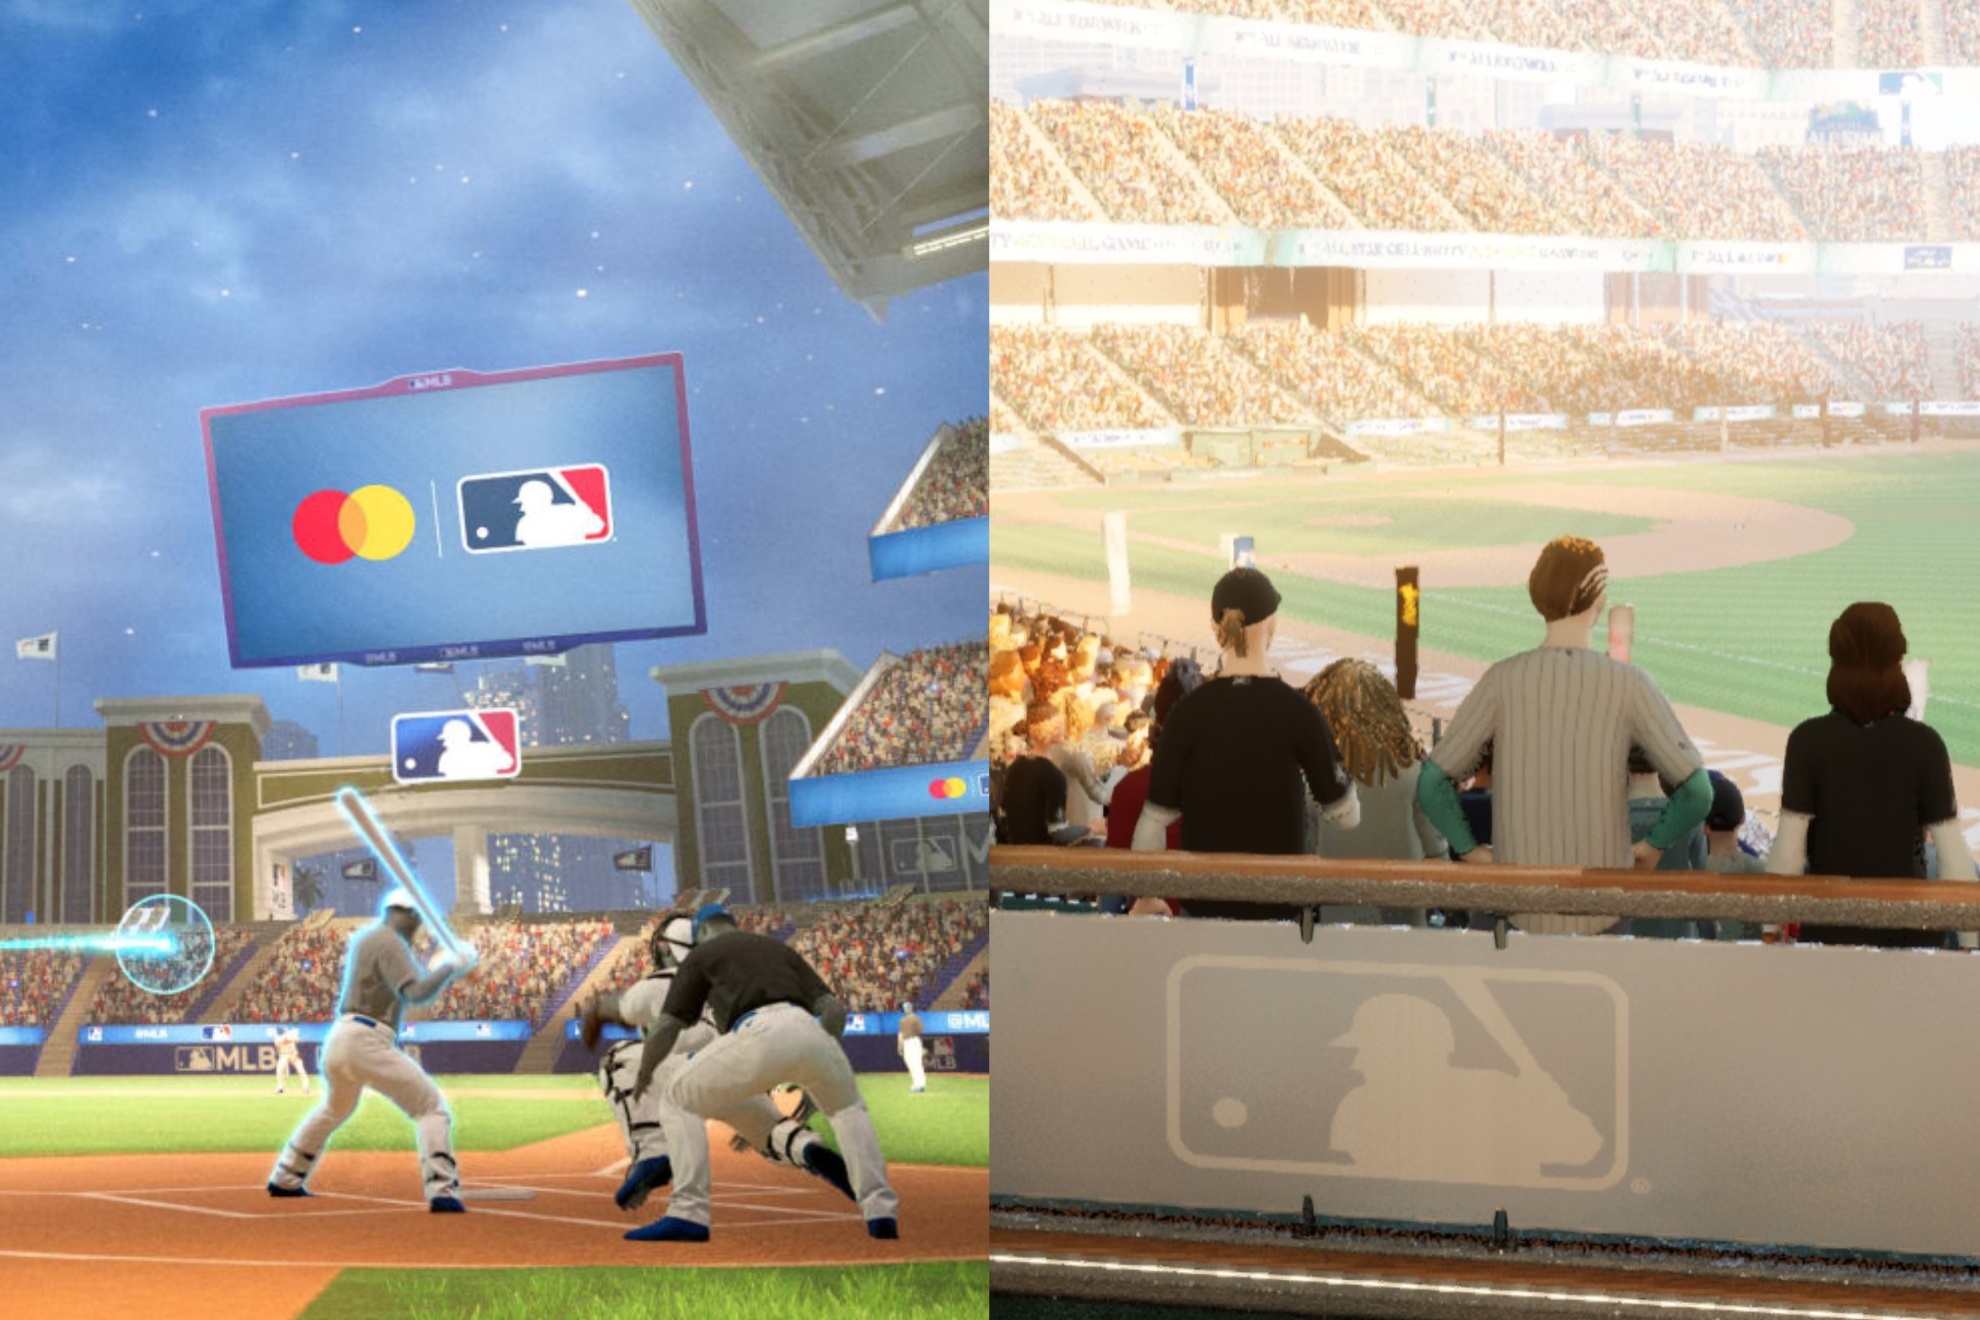 MLB's virtual ballpark experience is back for its first regular season game